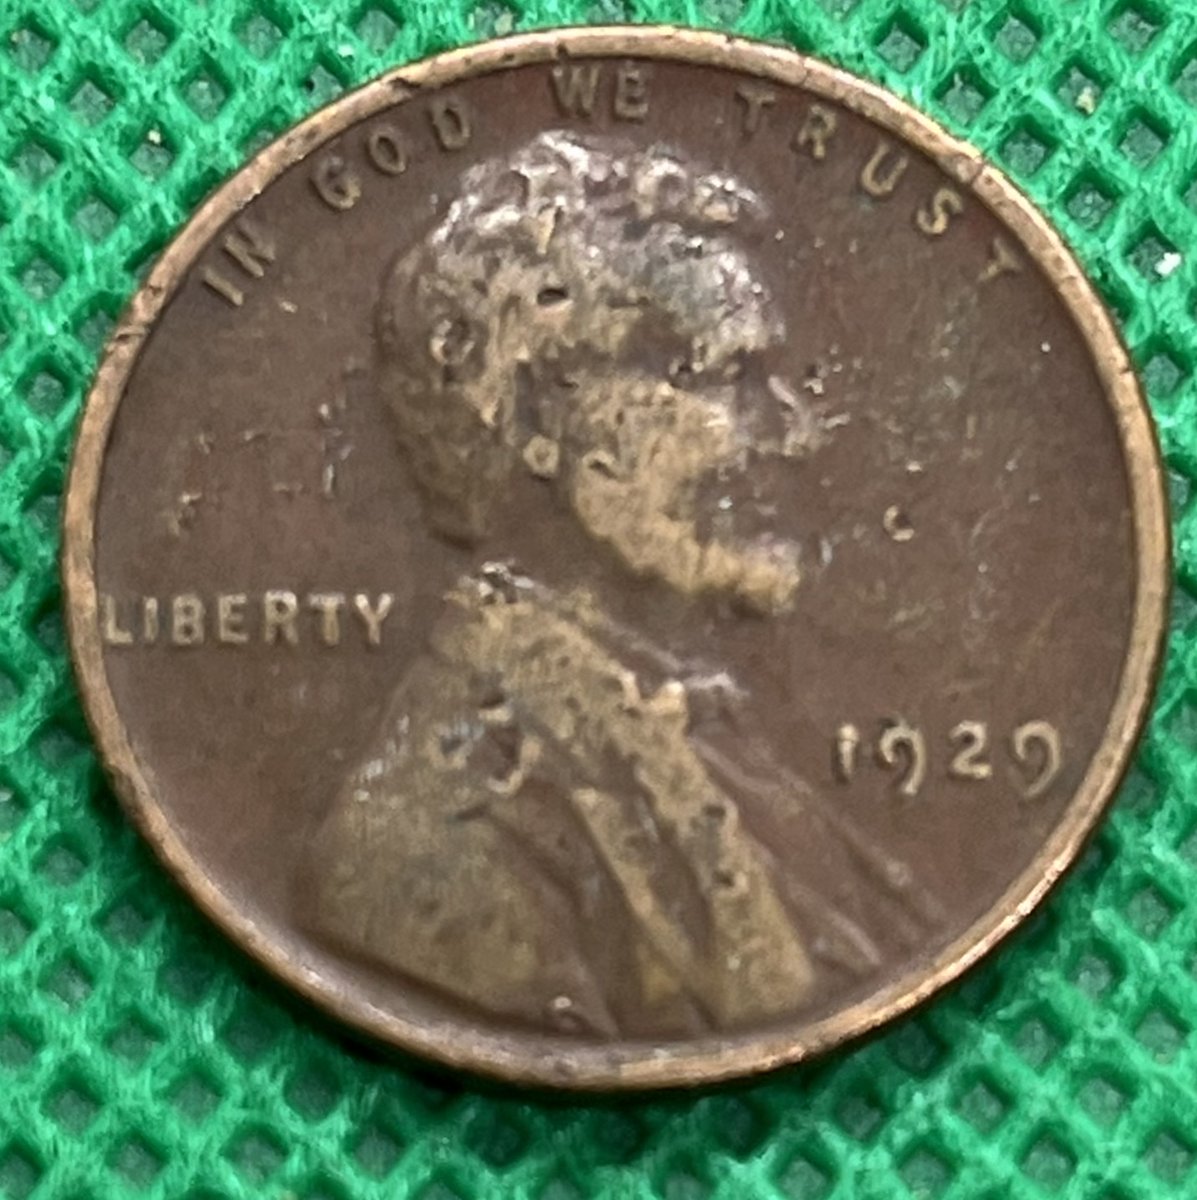 I found wheat pennies from five decades in the same box. A pretty worn 1929.